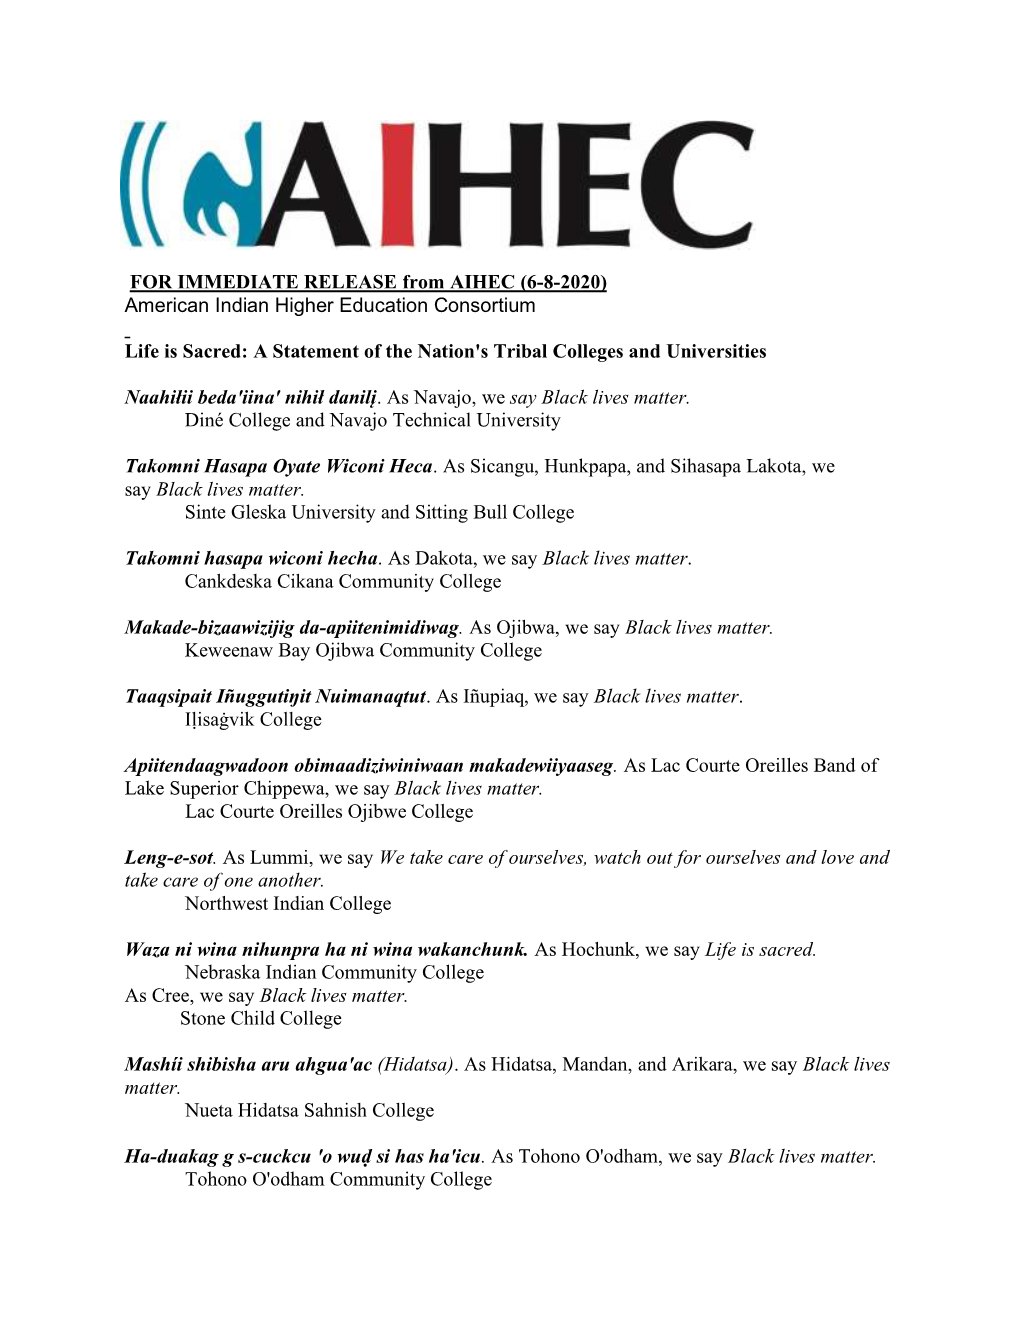 FOR IMMEDIATE RELEASE from AIHEC (6-8-2020) American Indian Higher Education Consortium